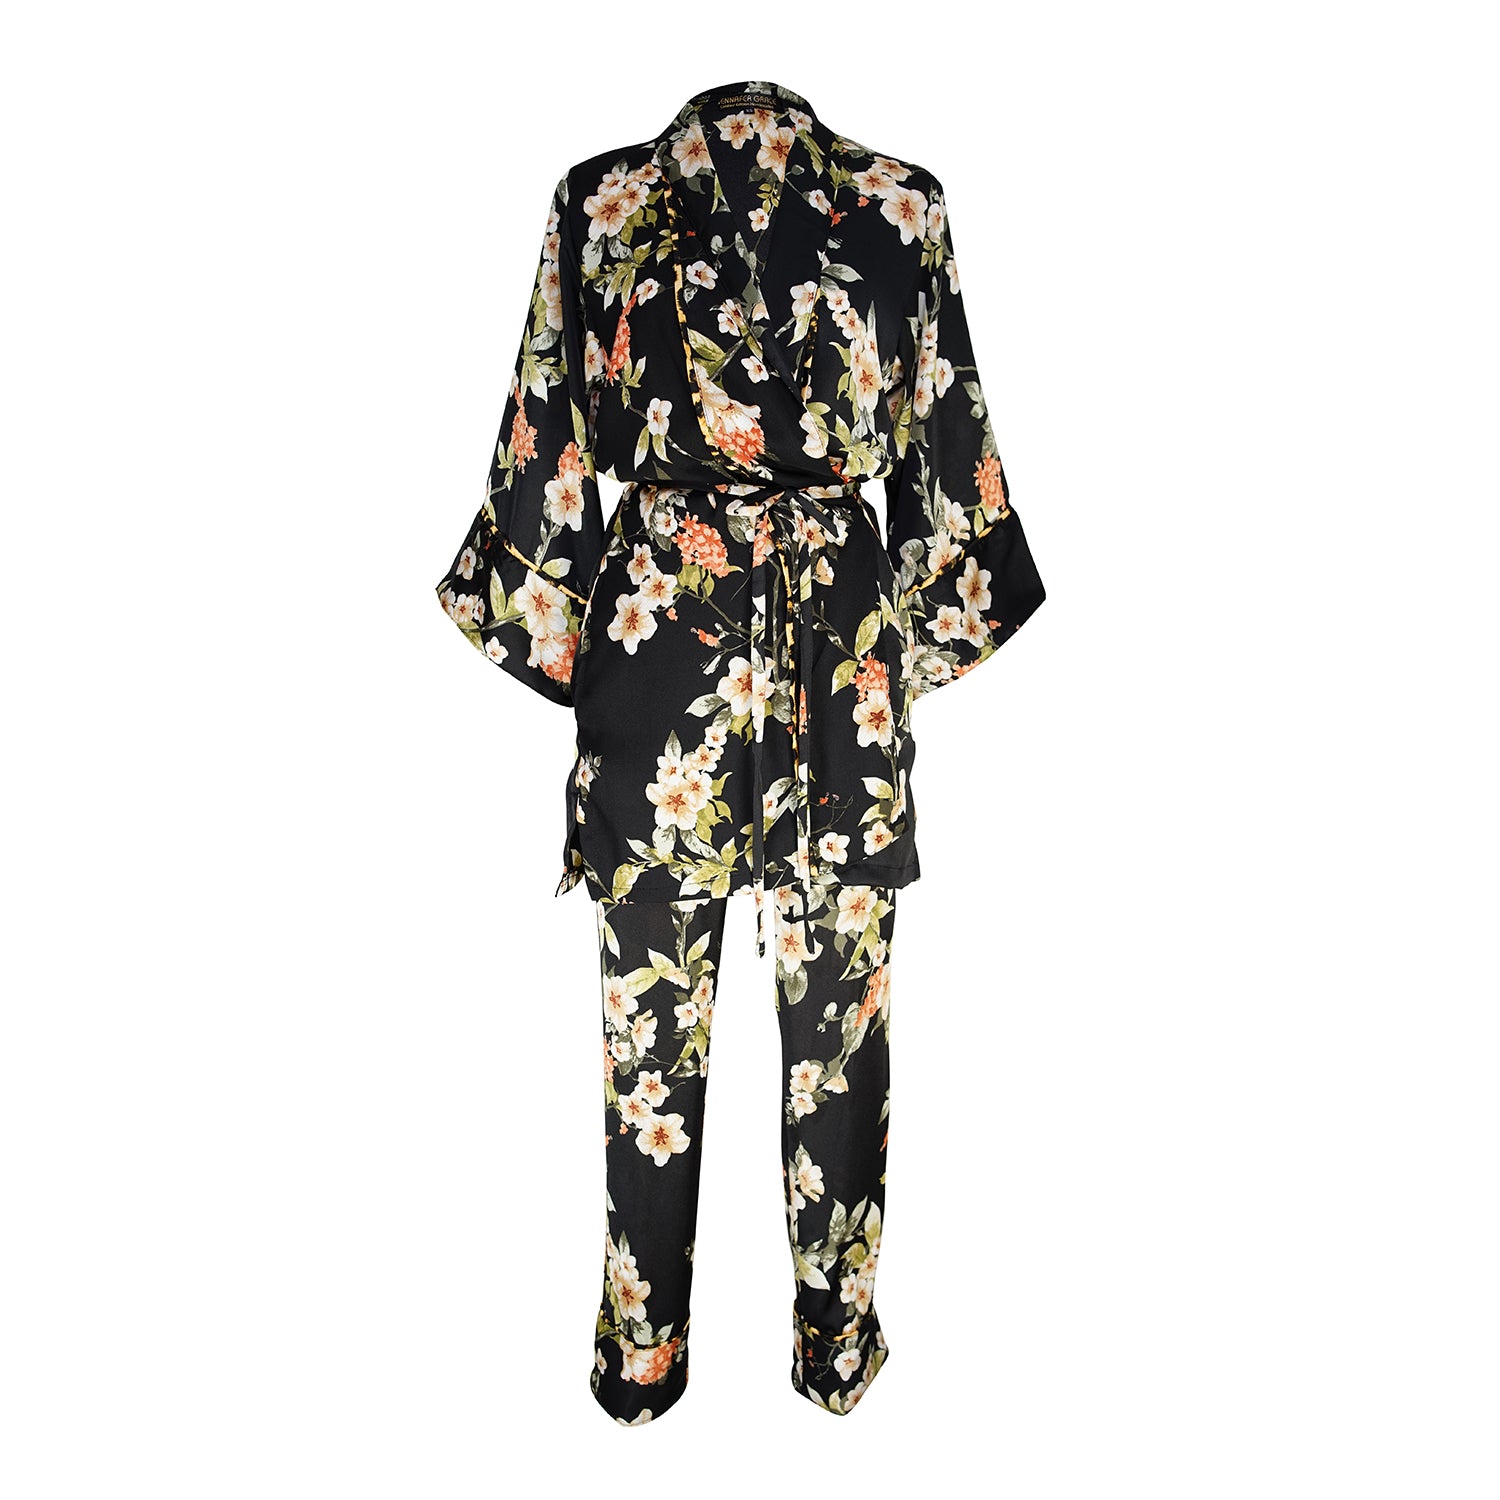 jennafer grace Deliciarum paglamas glam pajamas pjs co-ord coord matching set lounge wear wrap top tapered pant black floral orange flowers leopard print piping dark goth gothic boho bohemian hippie unisex handmade in California USA